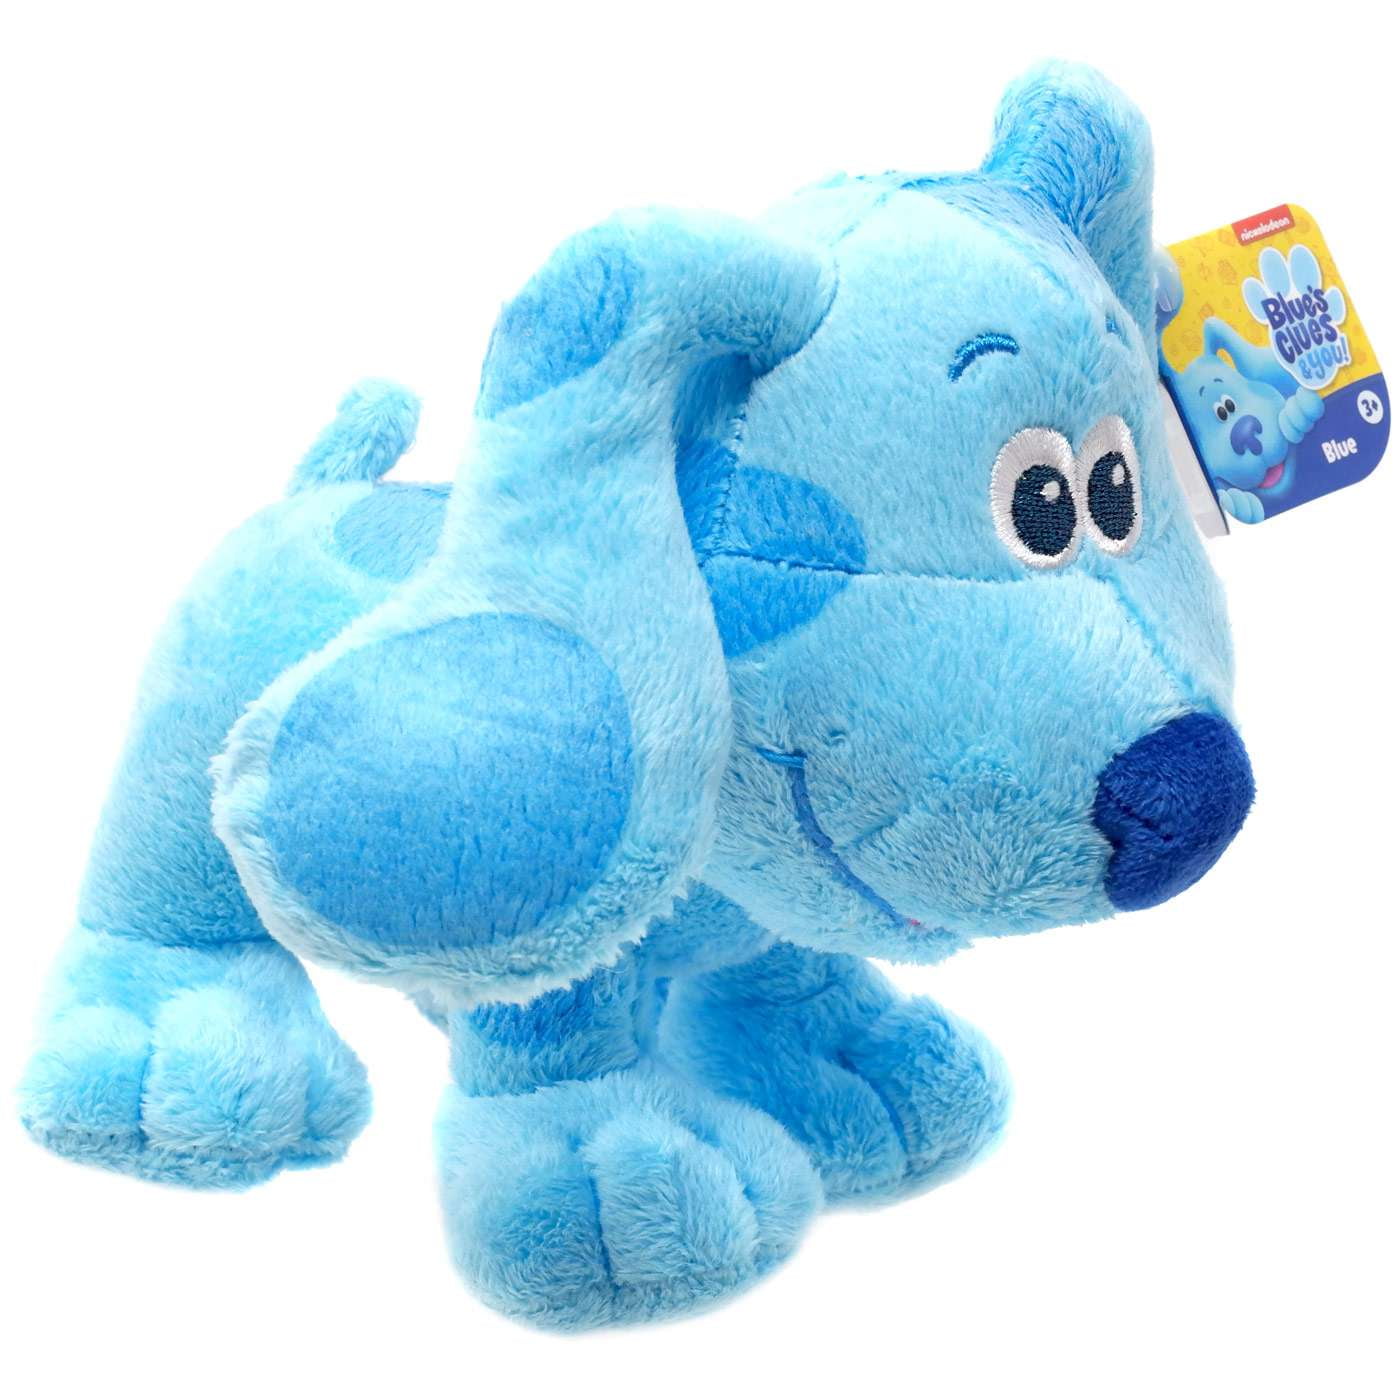  Blue's Clues & You! Boys'  Exclusive 10pk of 100